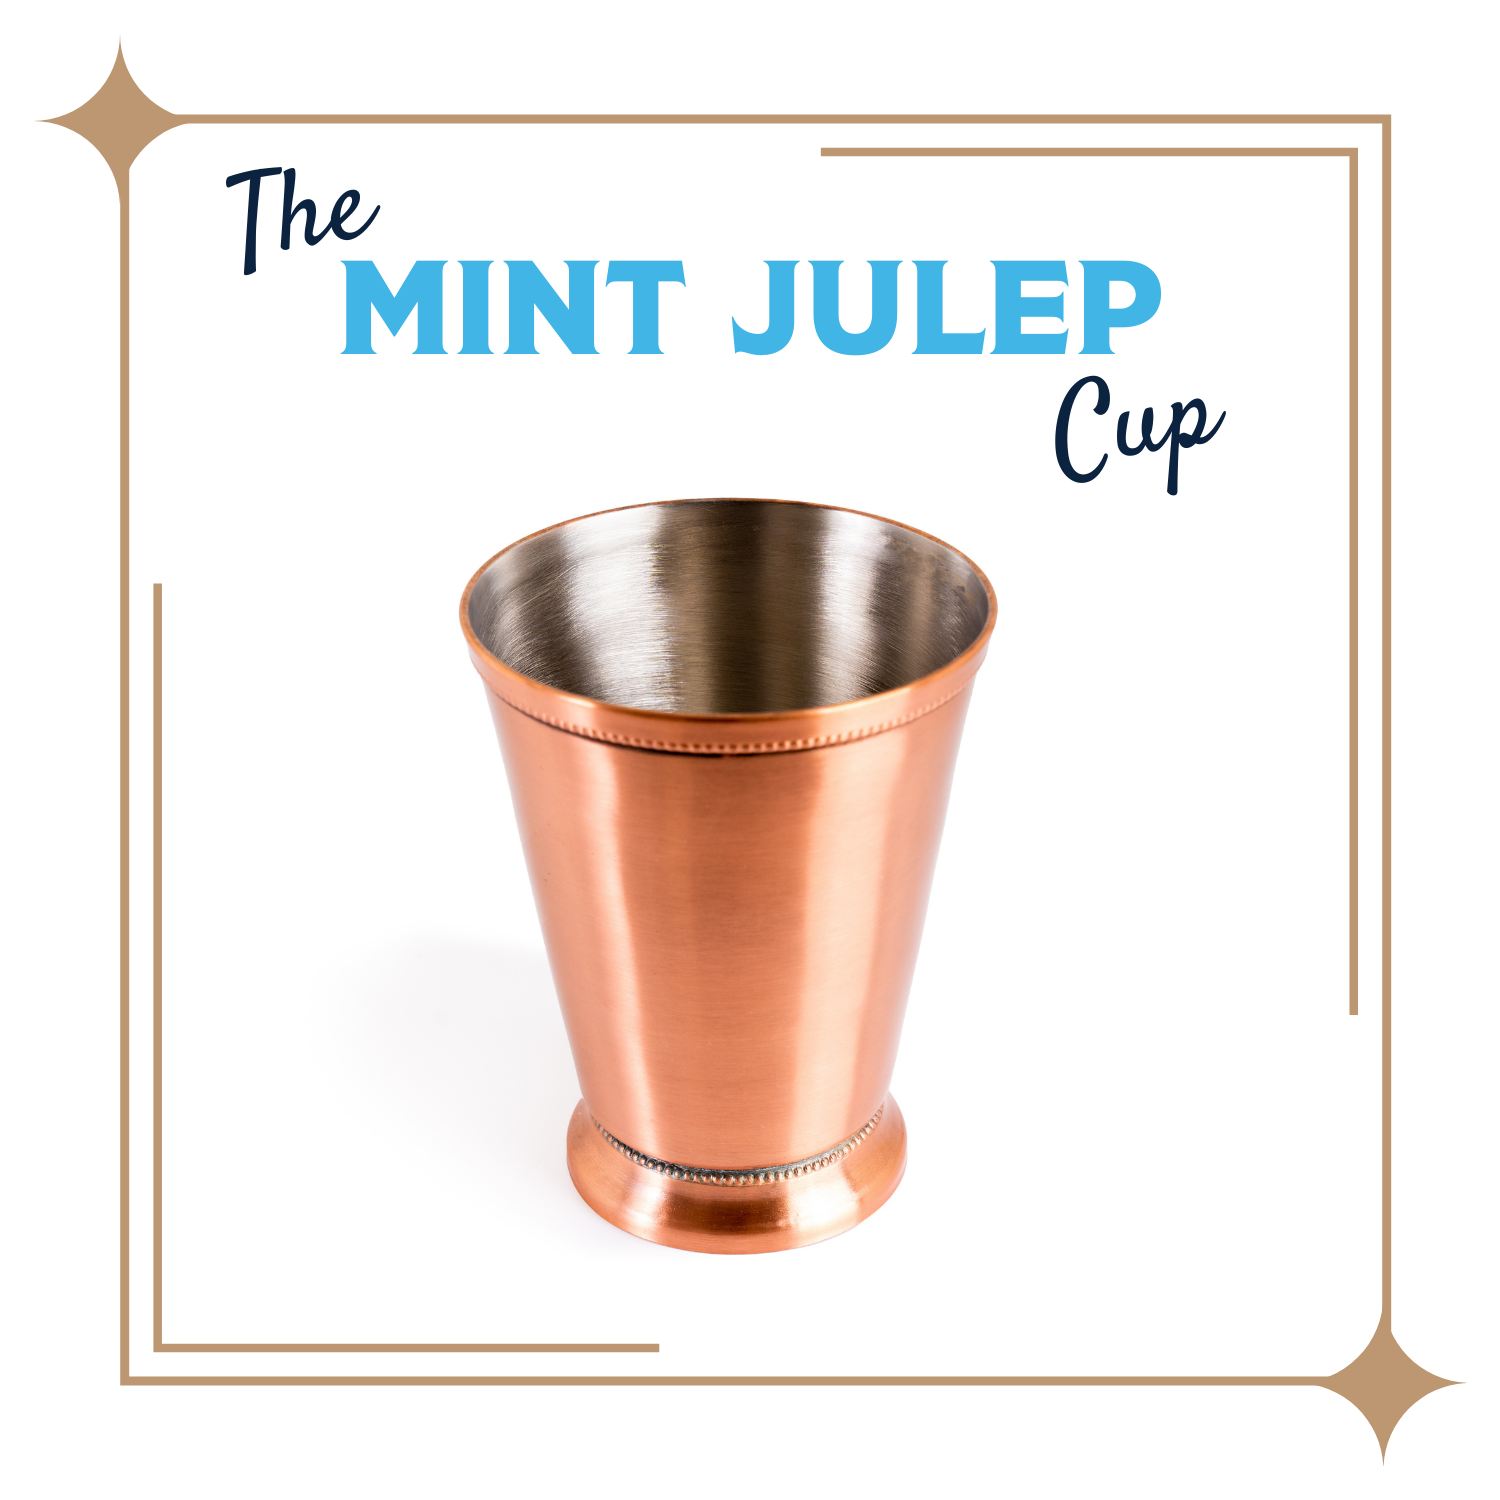 The Mint Julep Cup